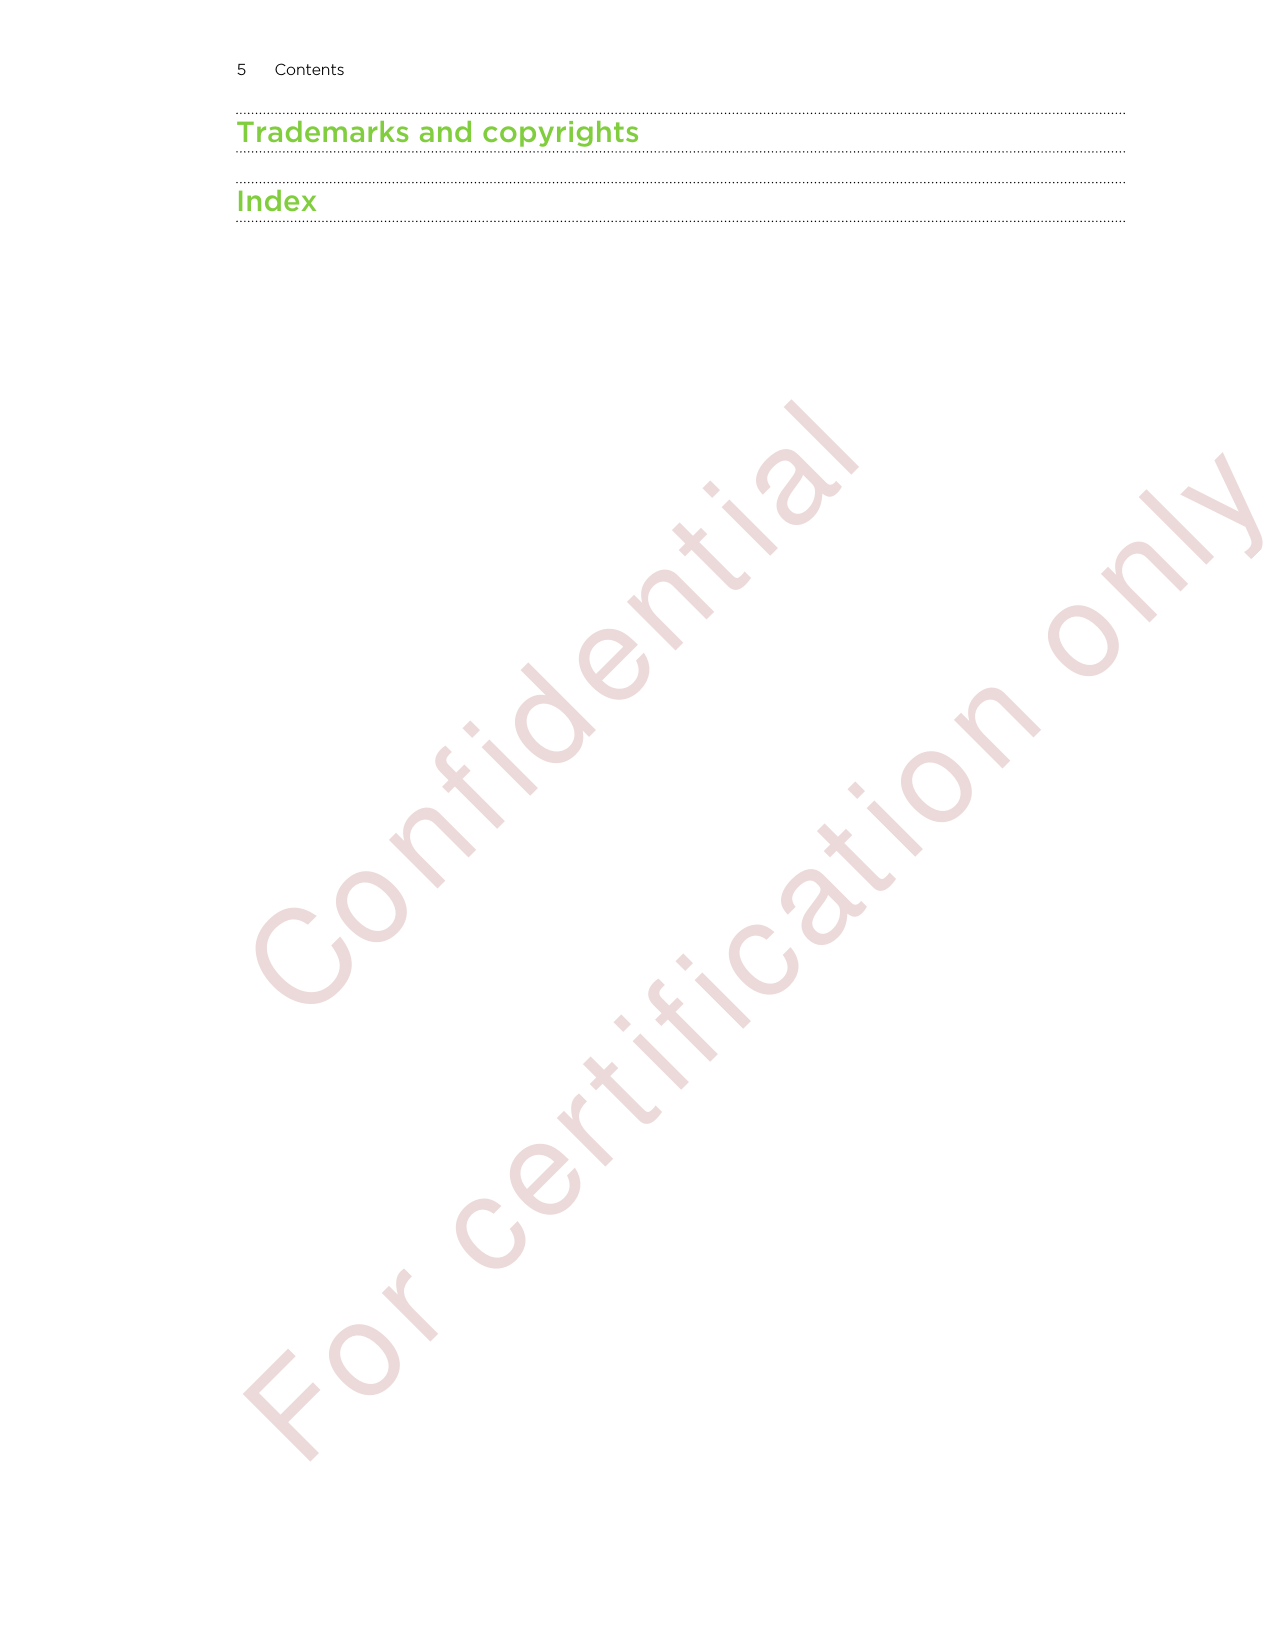 Trademarks and copyrightsIndex5 Contents        Confident ial  For cert ificat ion only